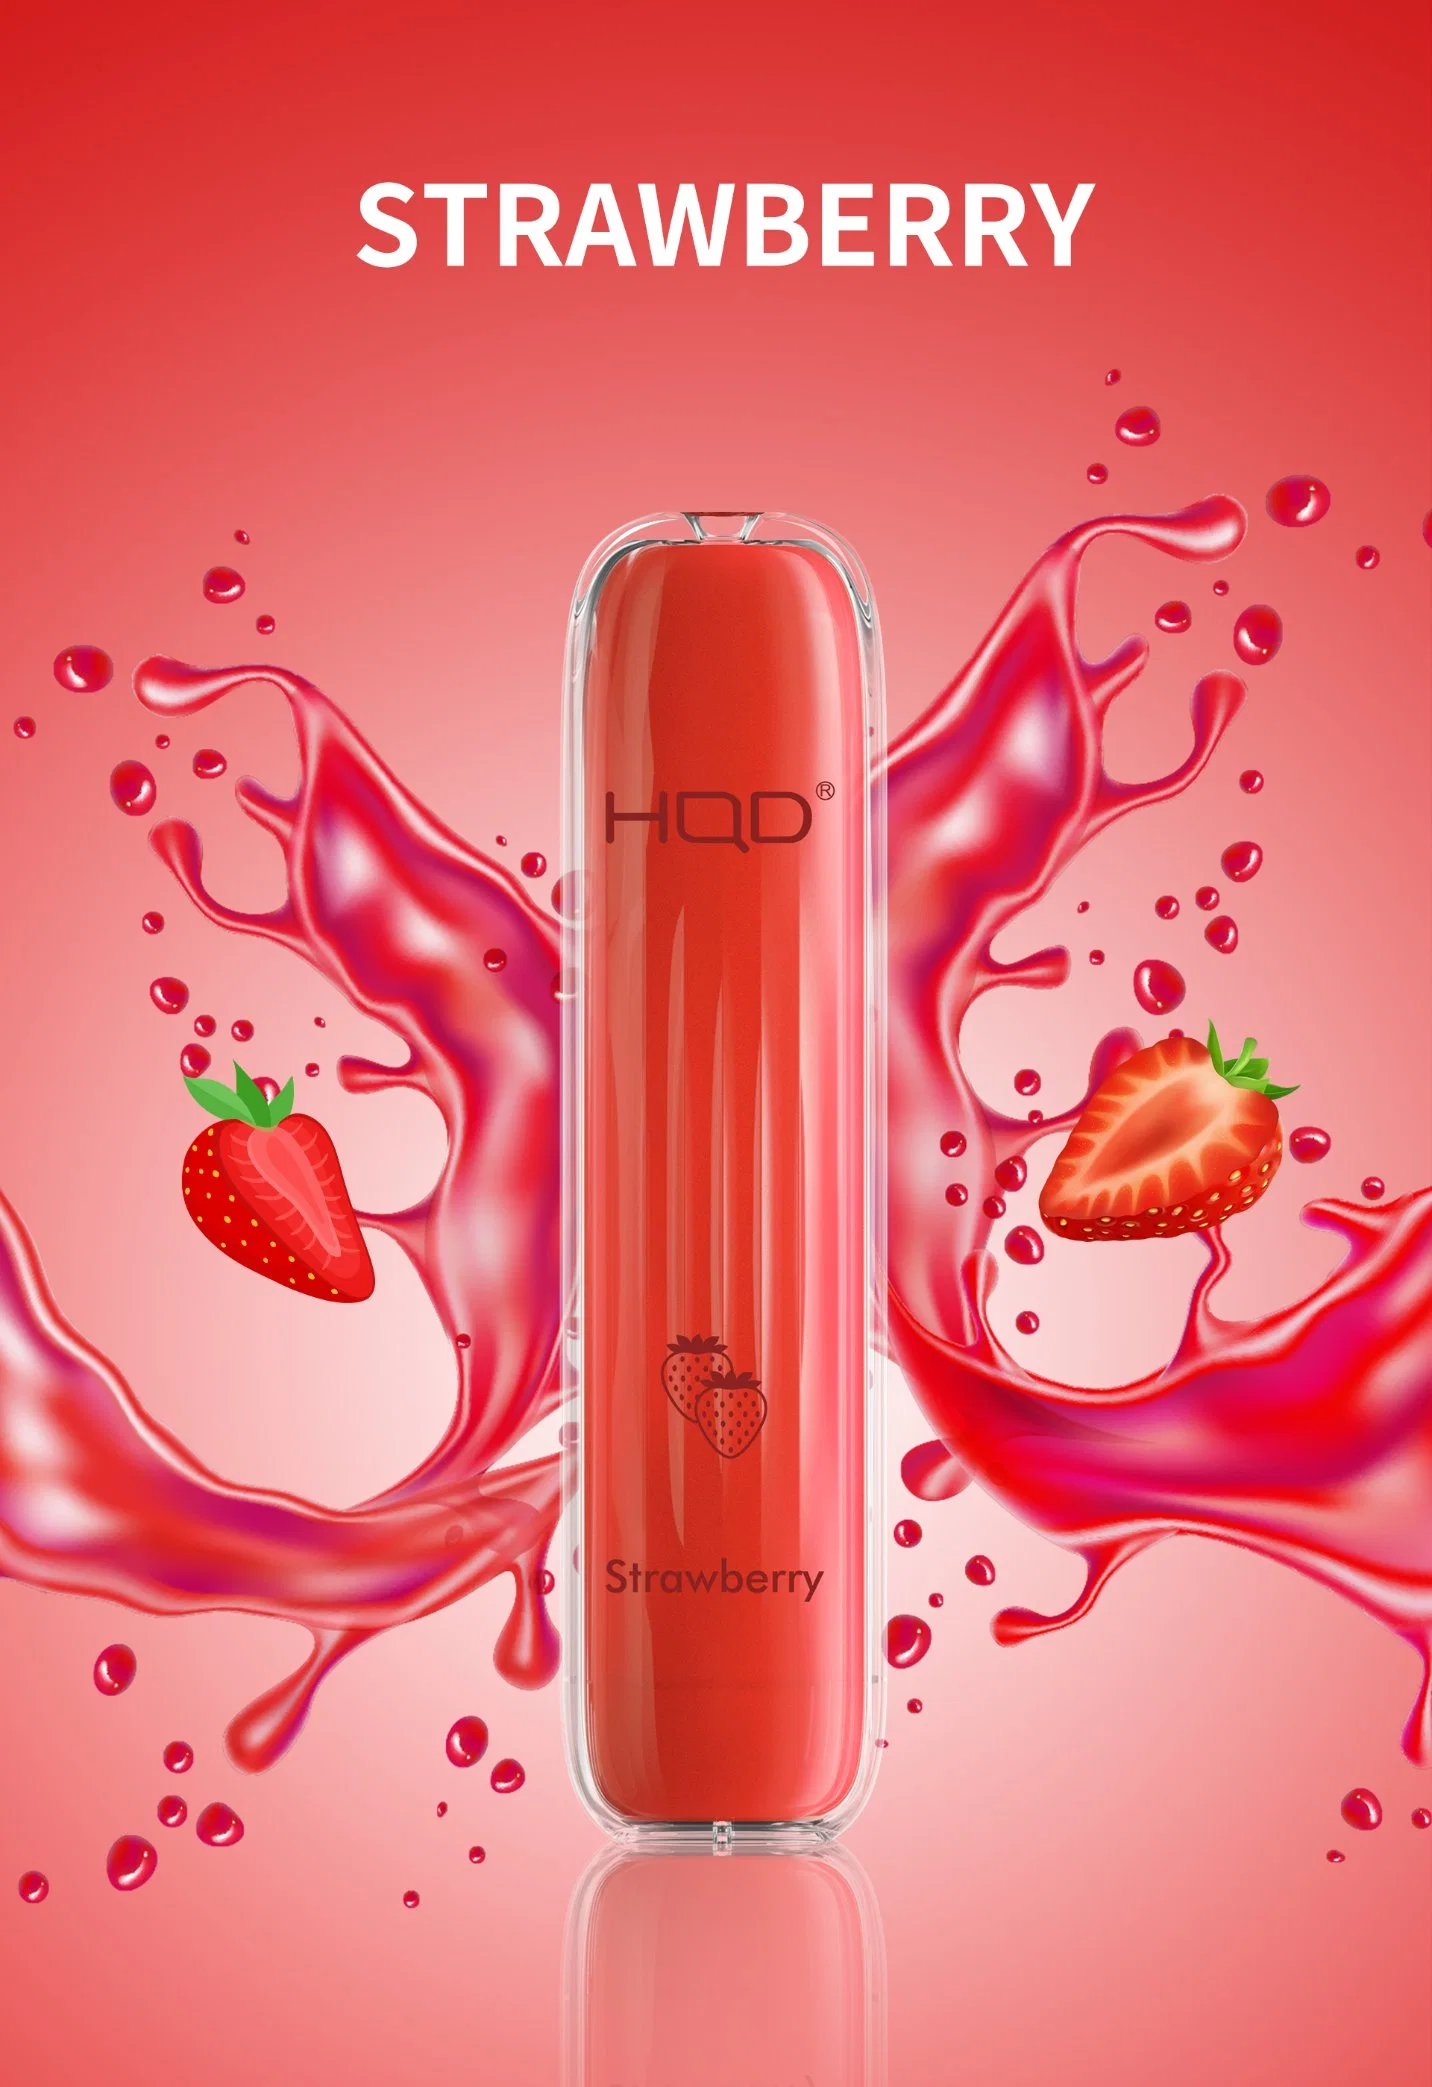 Tpd Vape Wholesale/Supplier Hqd Wave 600 Puffs Disposable/Chargeable Pod Hot Selling in Germany Spain Georgia Disposable/Chargeable Vape